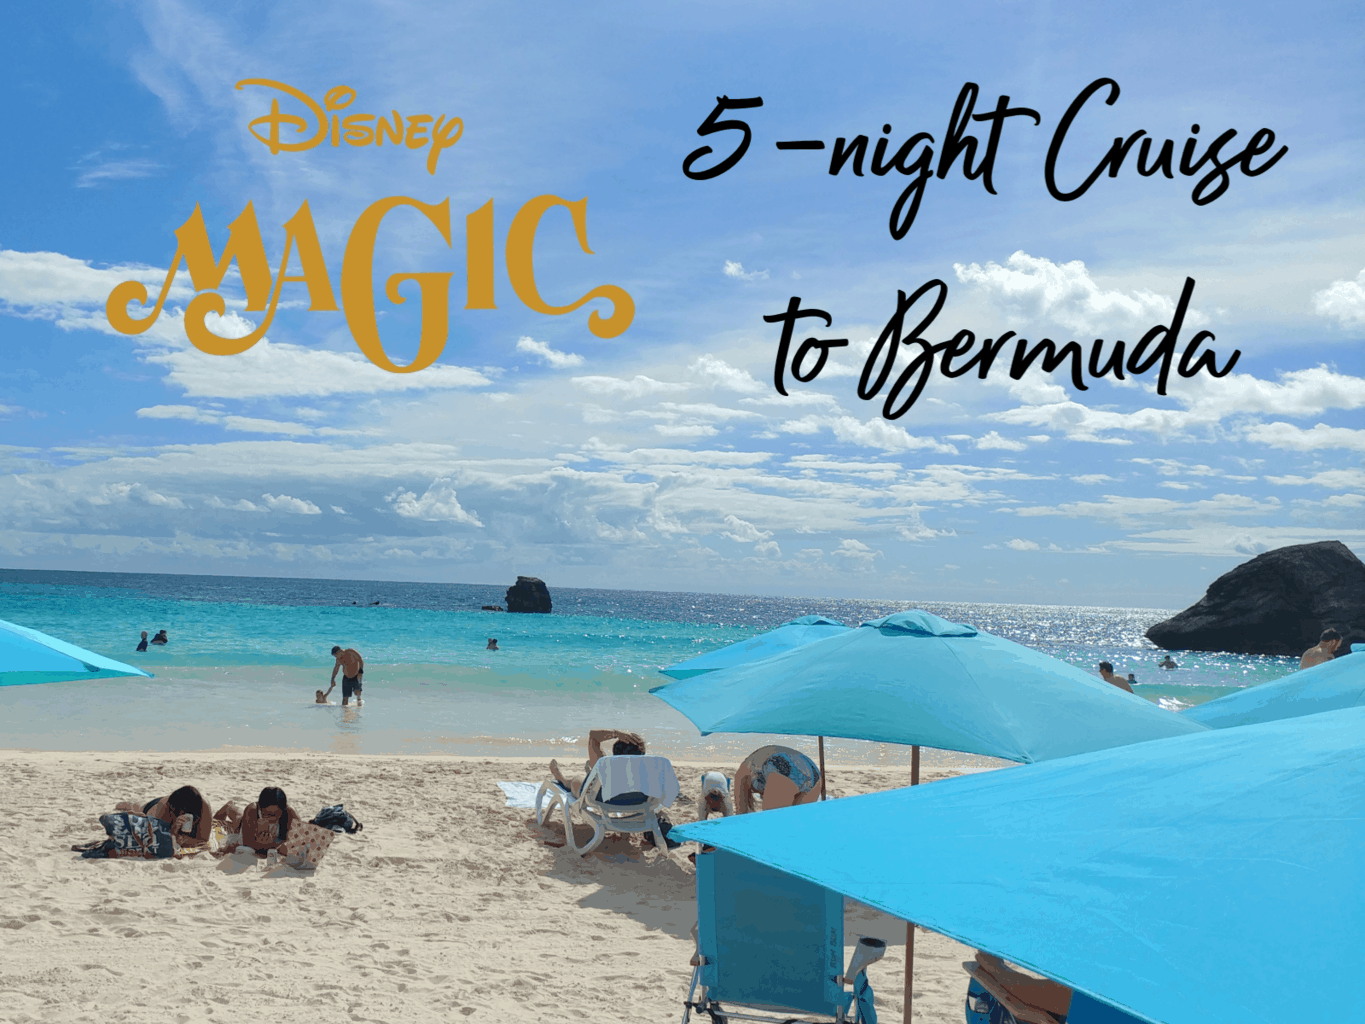 Disney Cruise Vacation to Bermuda Day 1 — Living with the Magic